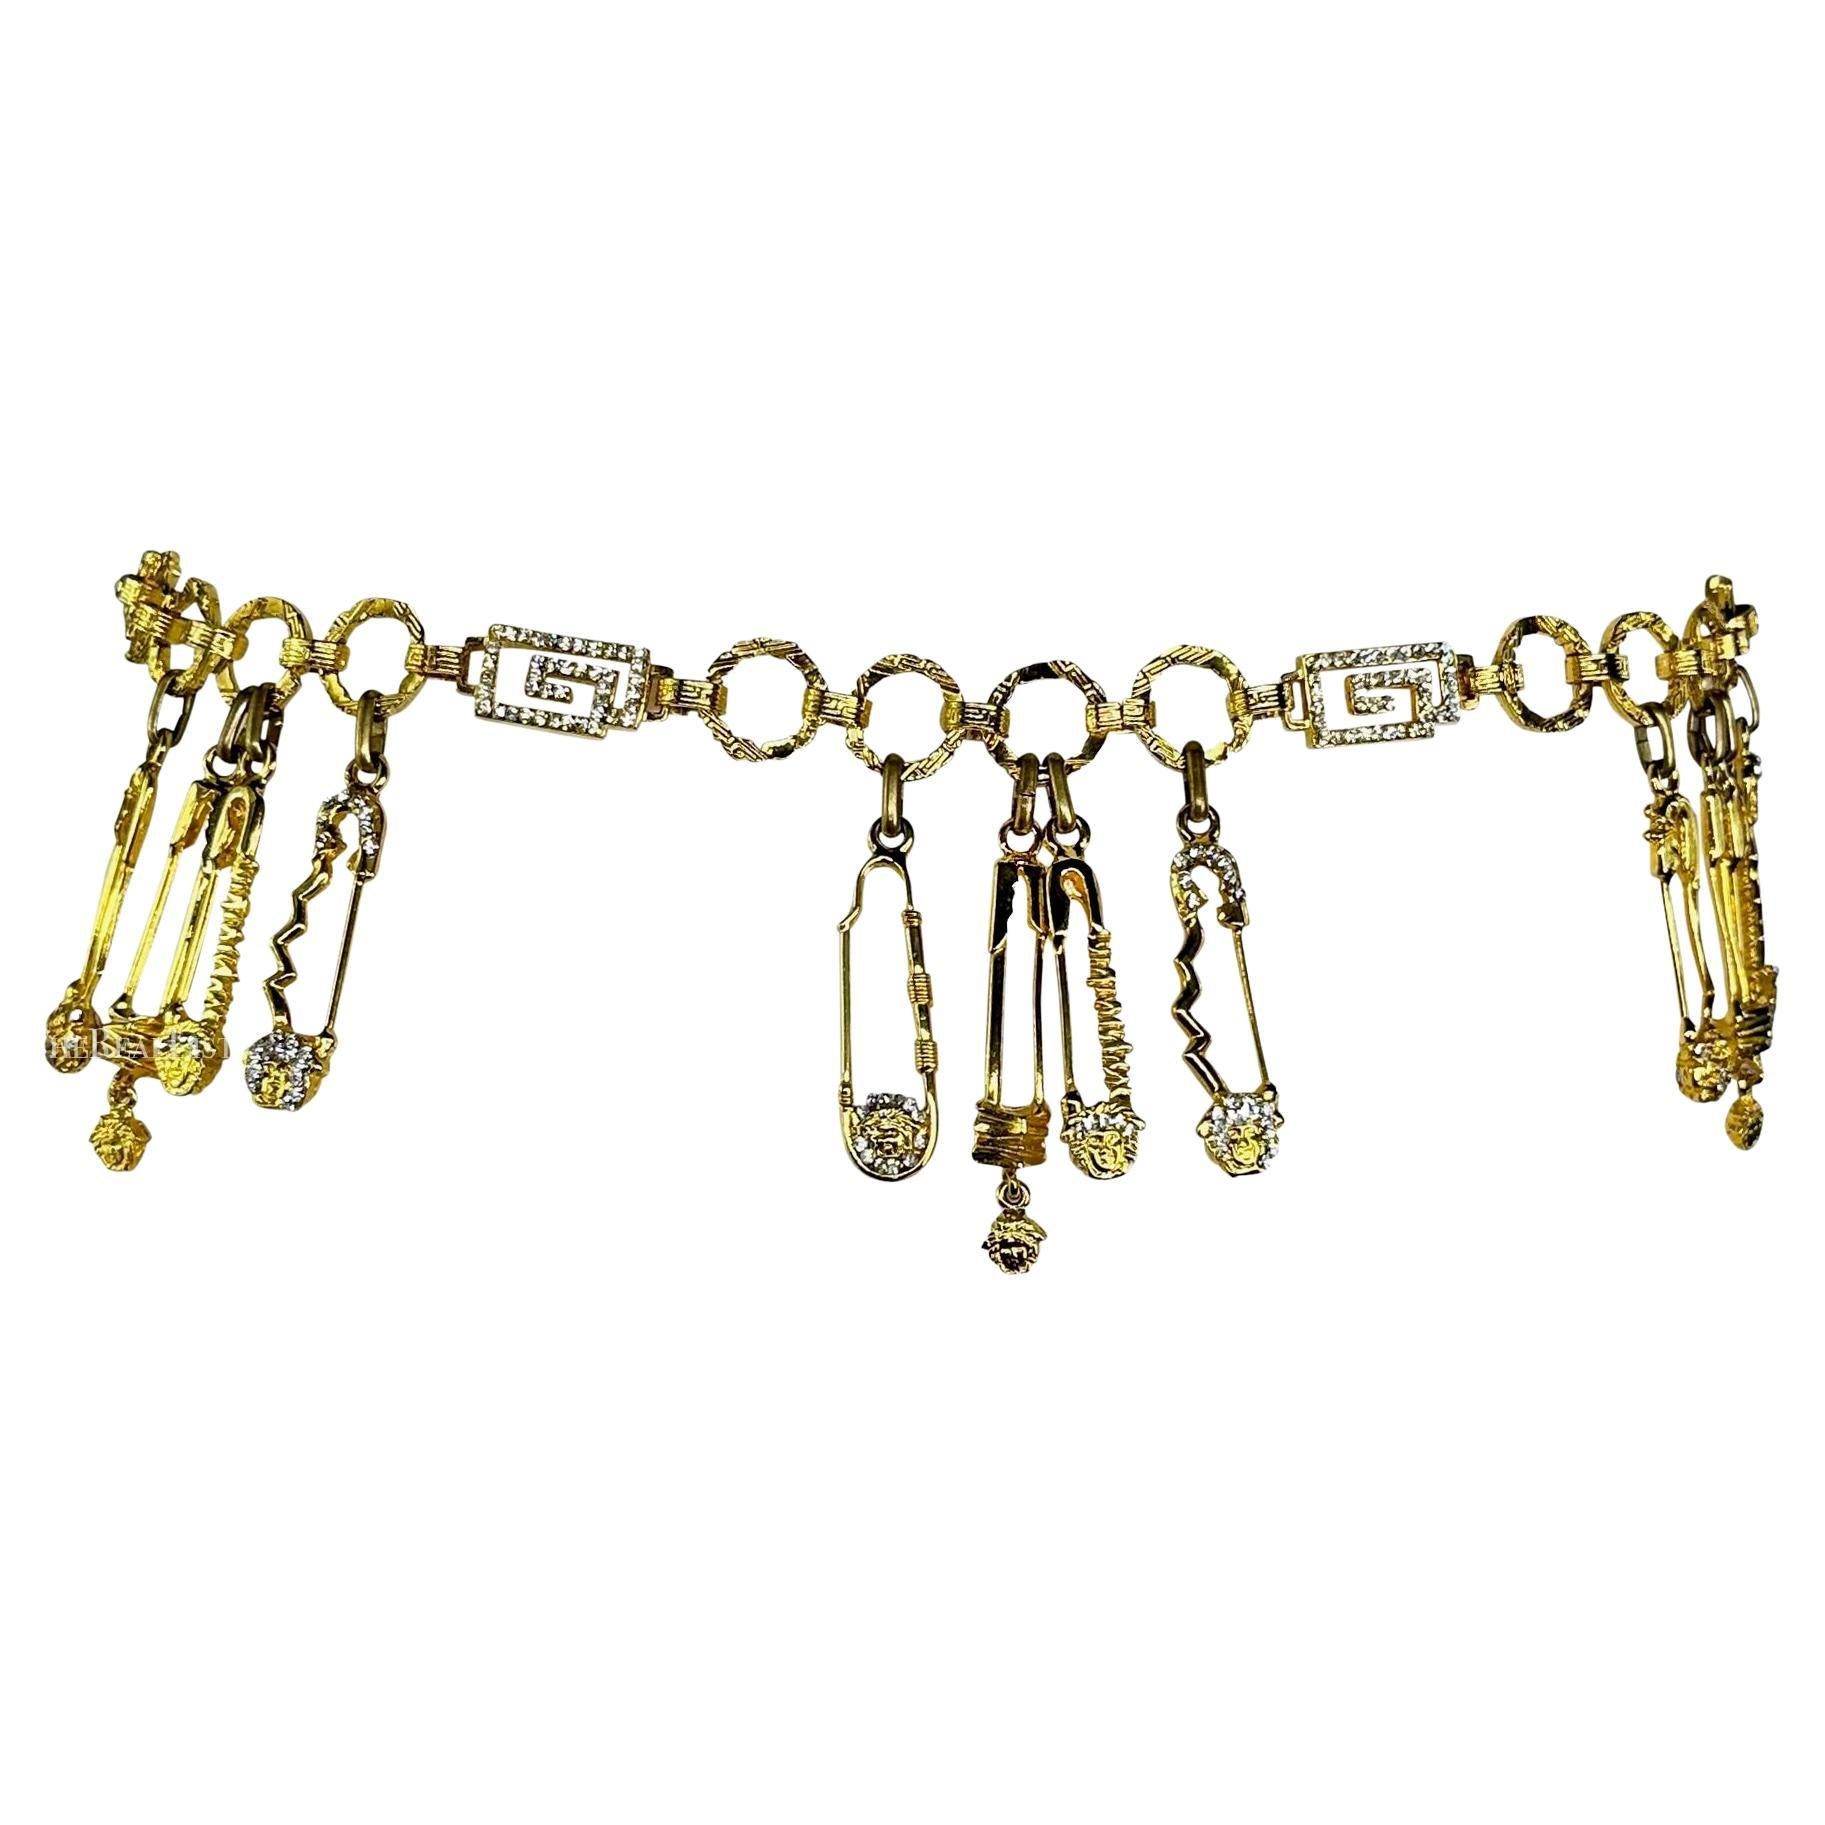 S/S 1994 Gianni Versace Gold Tone Rhinestone Safety Pin Medusa Chain Belt  For Sale 2